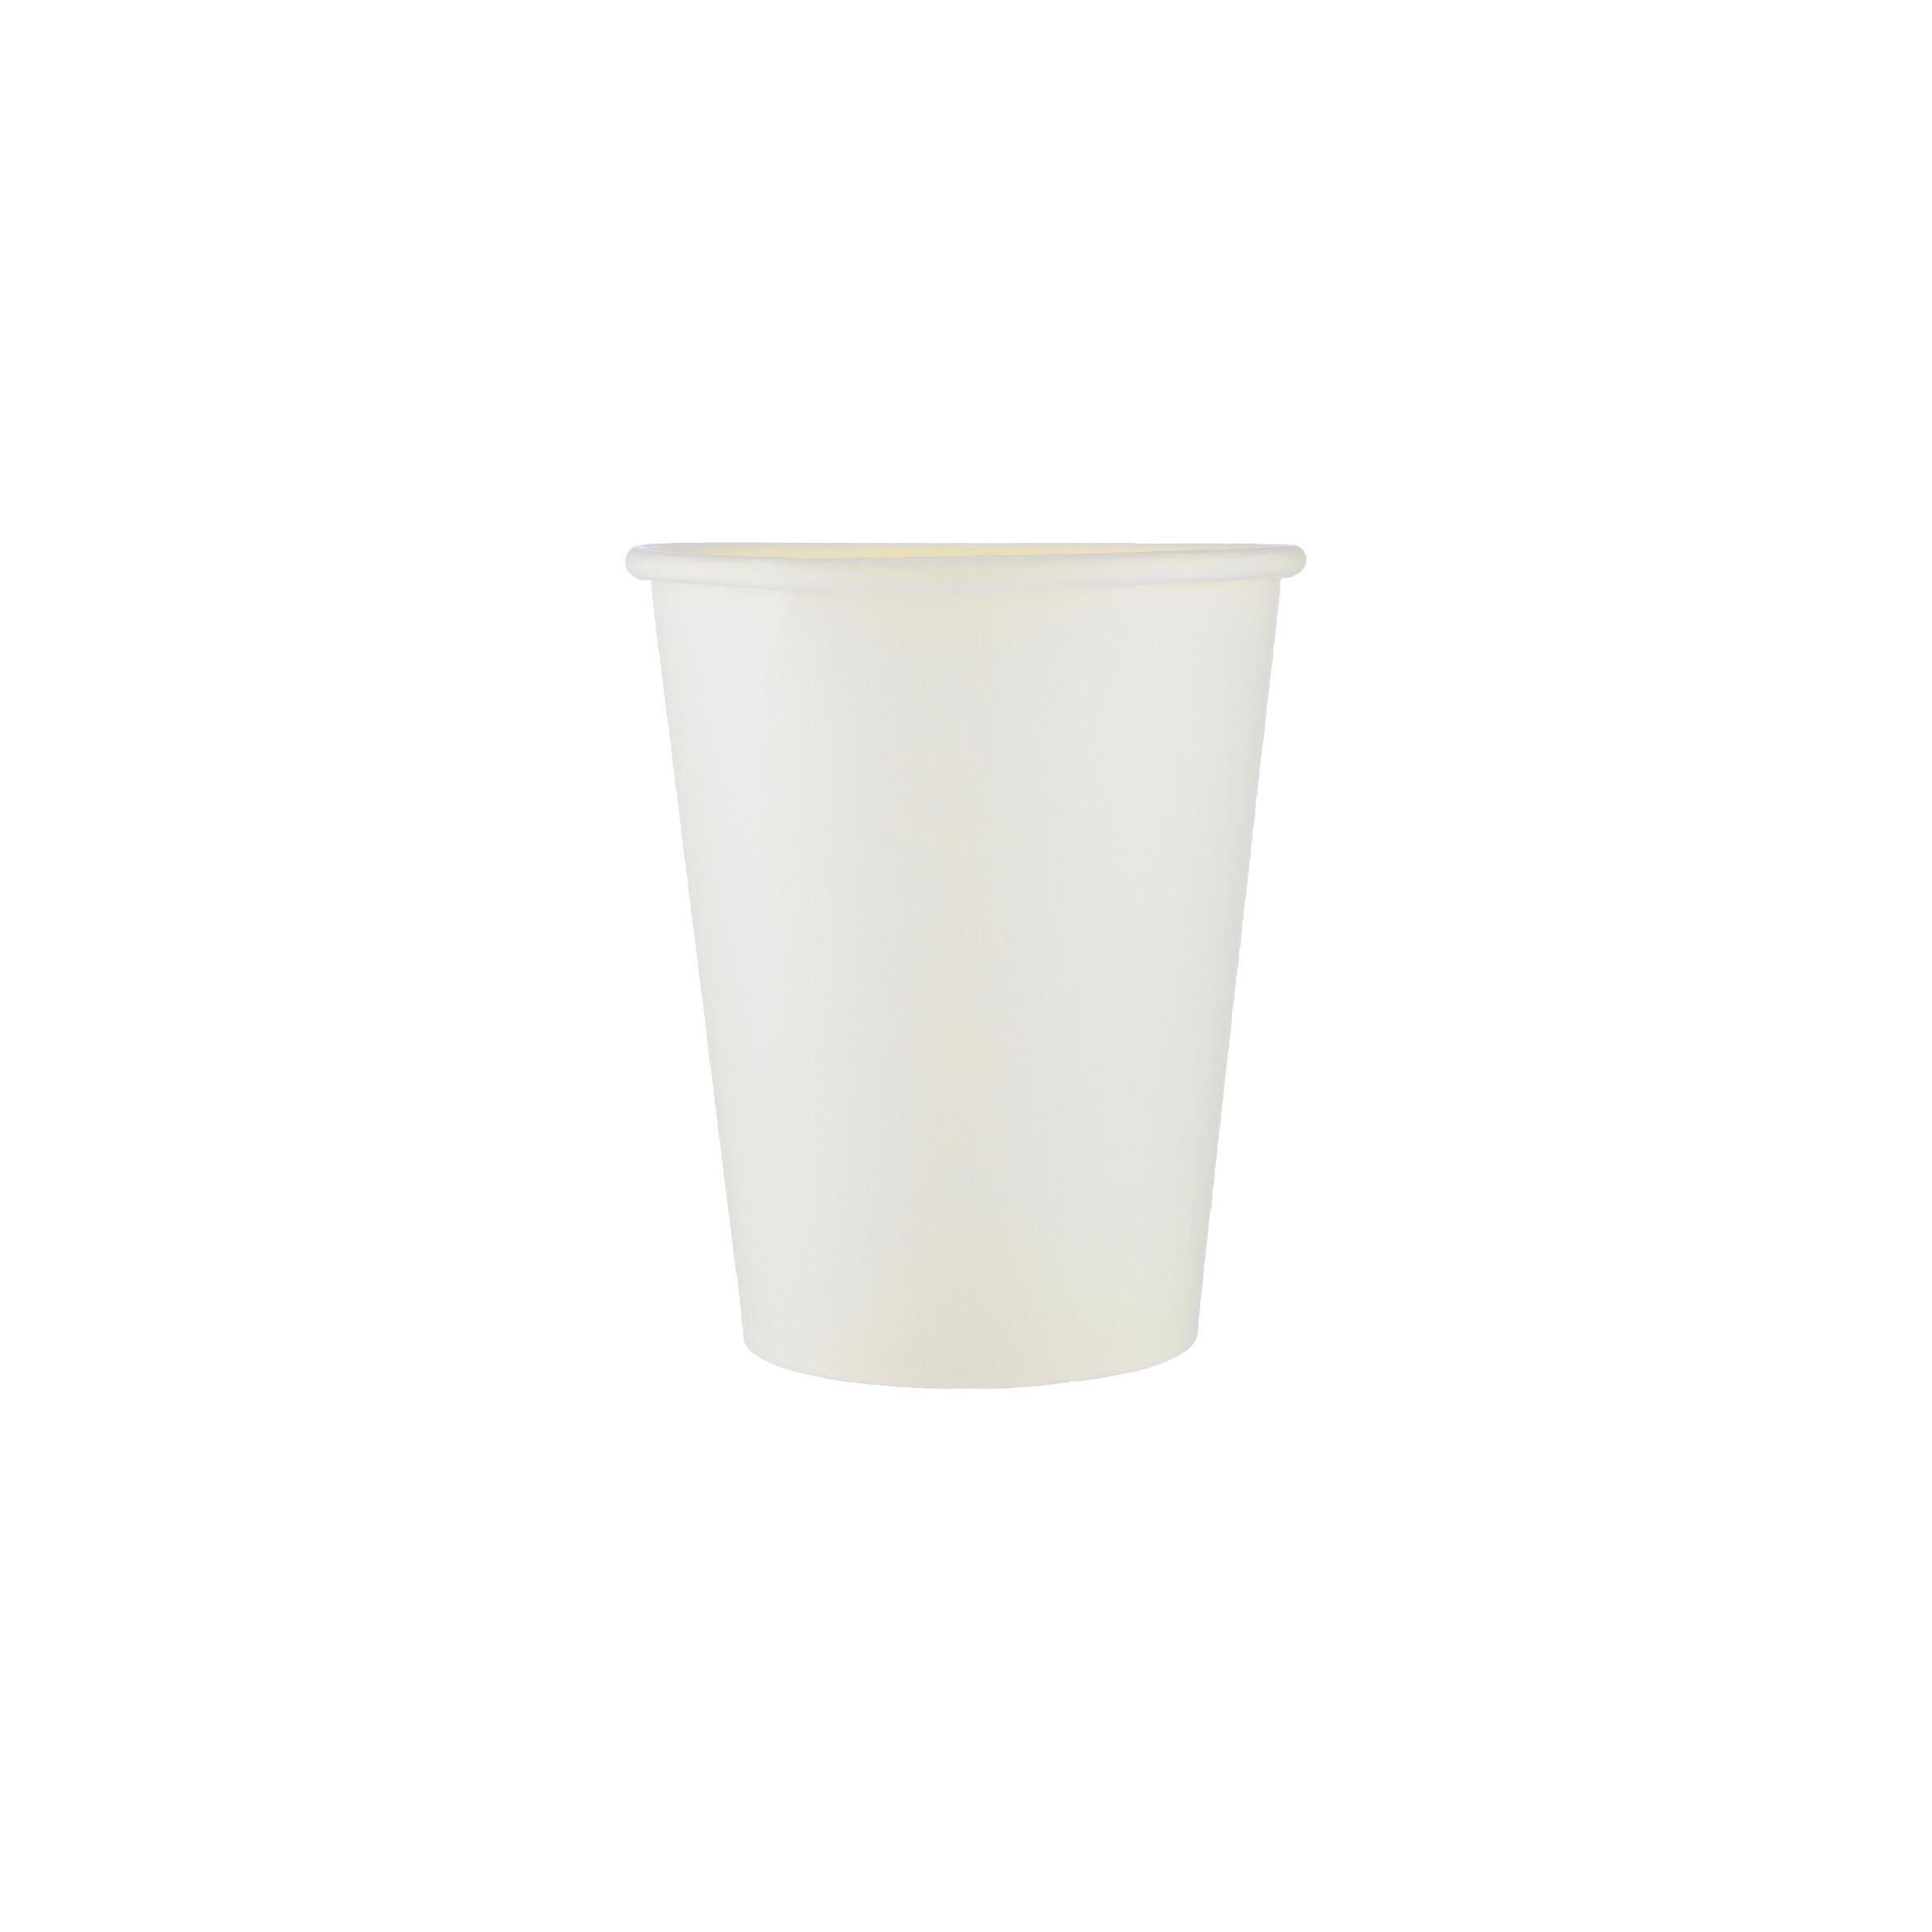 1000 Pieces 8 oz White Single Wall Paper Cups